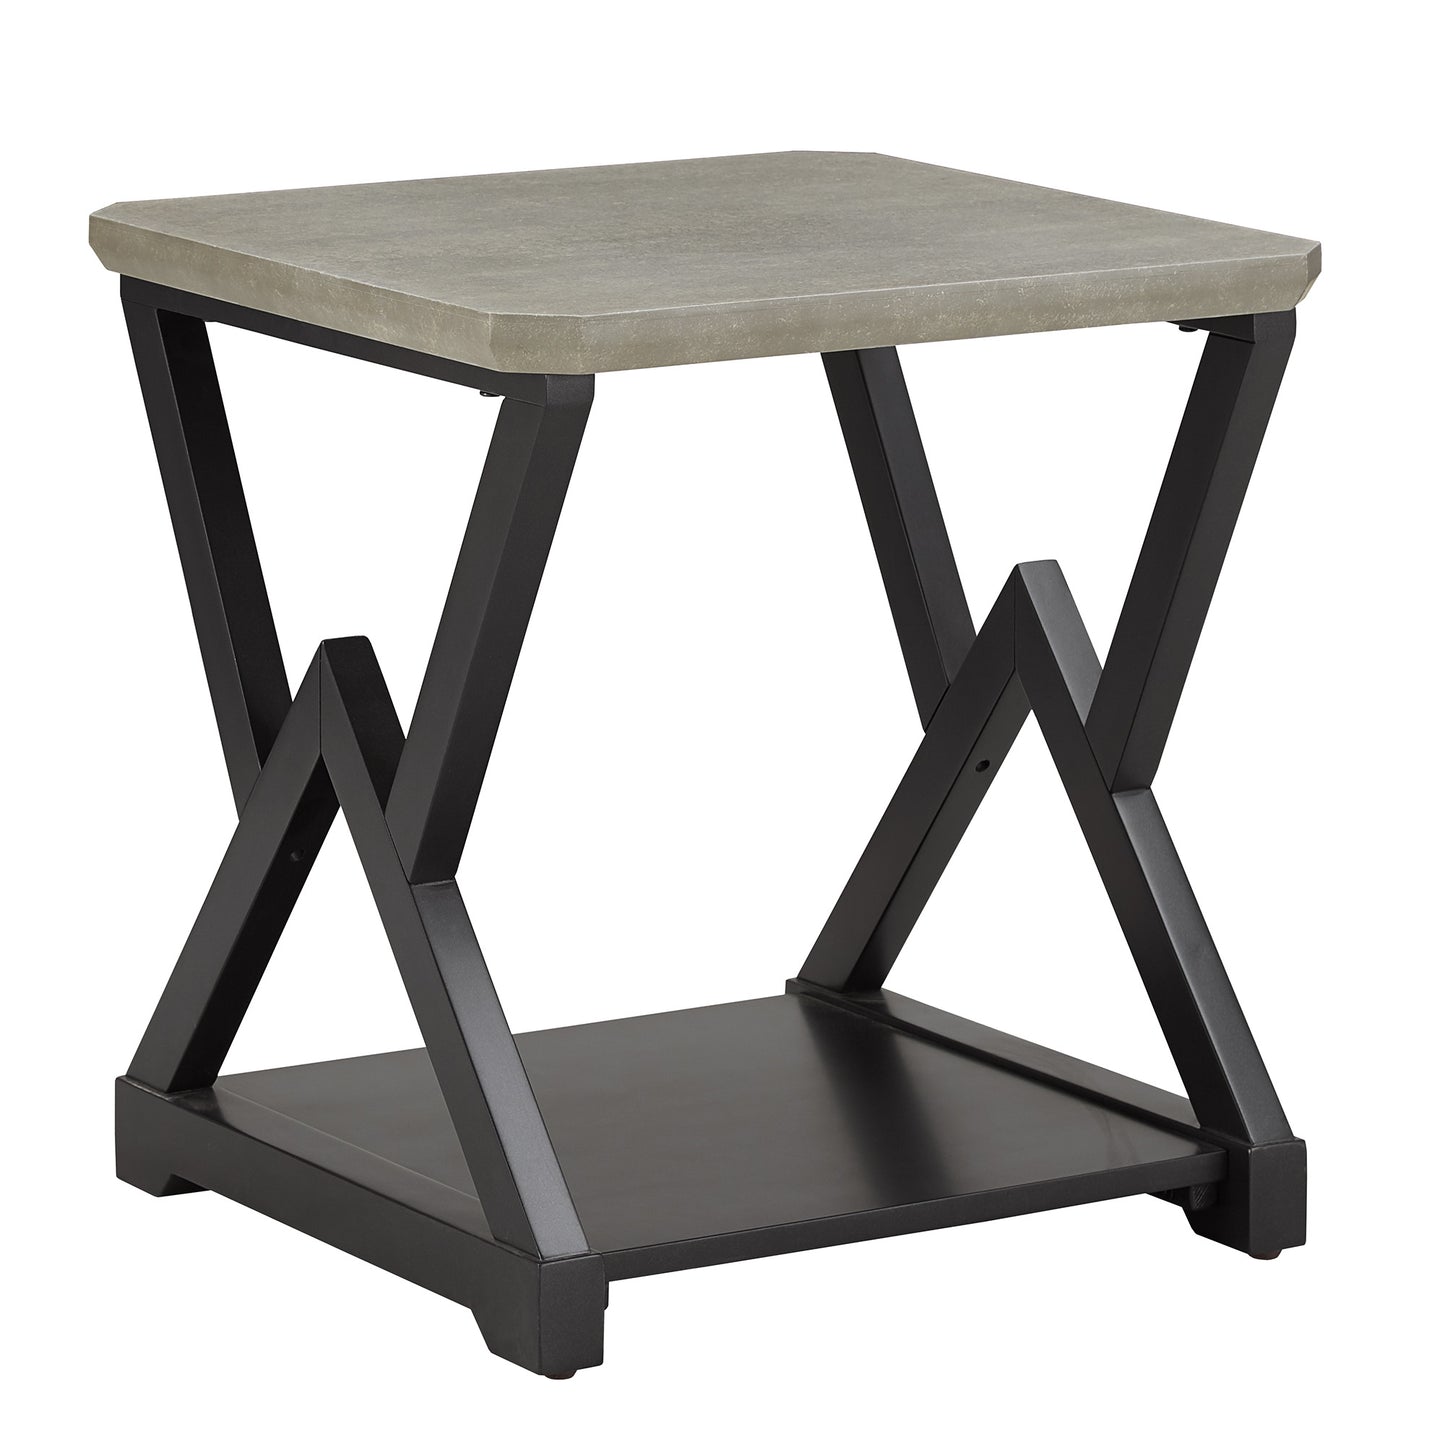 Black Finish Light Grey Fiber Cement Top Table - Coffee and End Table Set